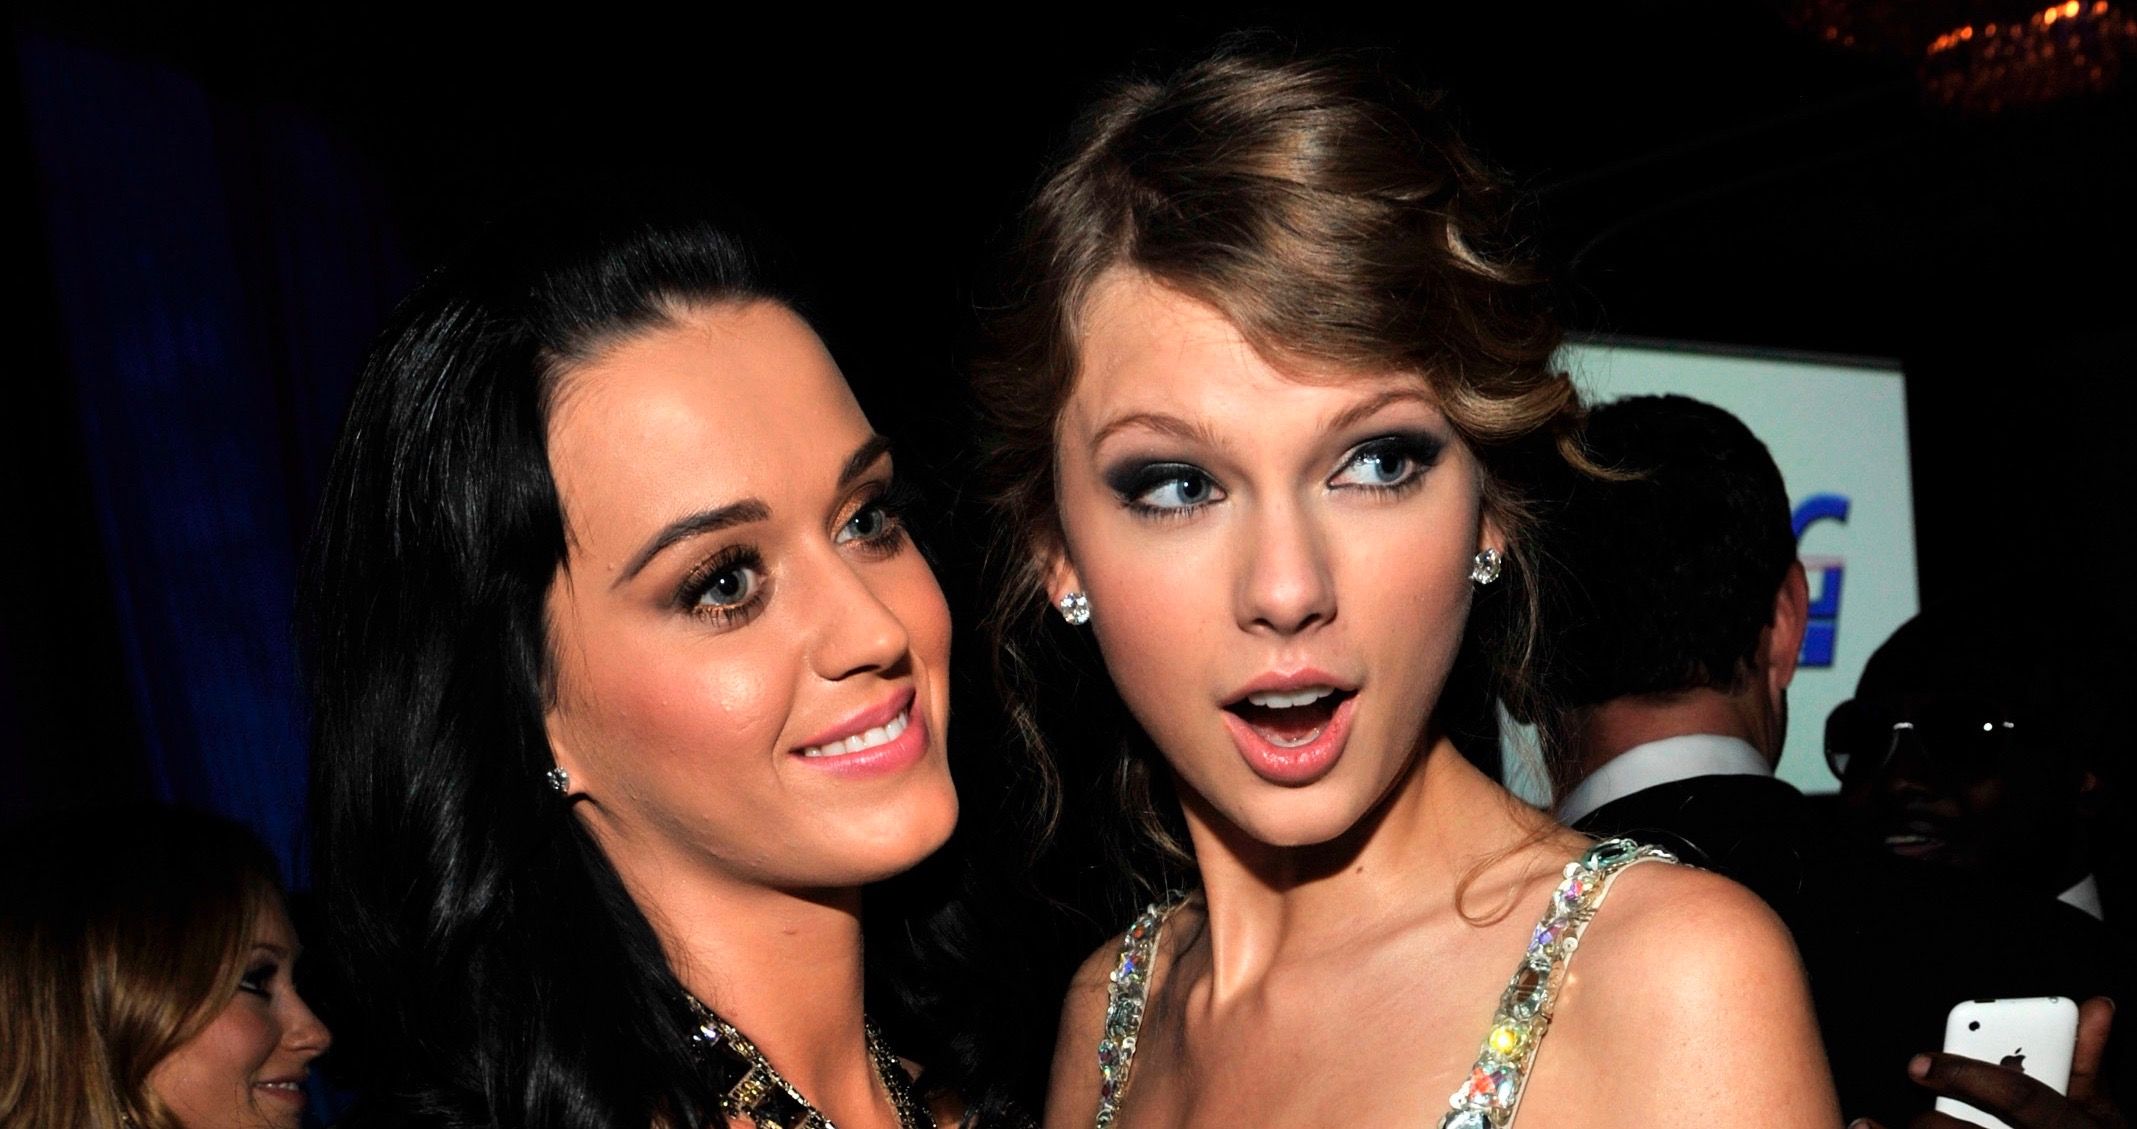 Katy Perry Says She Forgives Taylor Swift For Their Longtime Feud